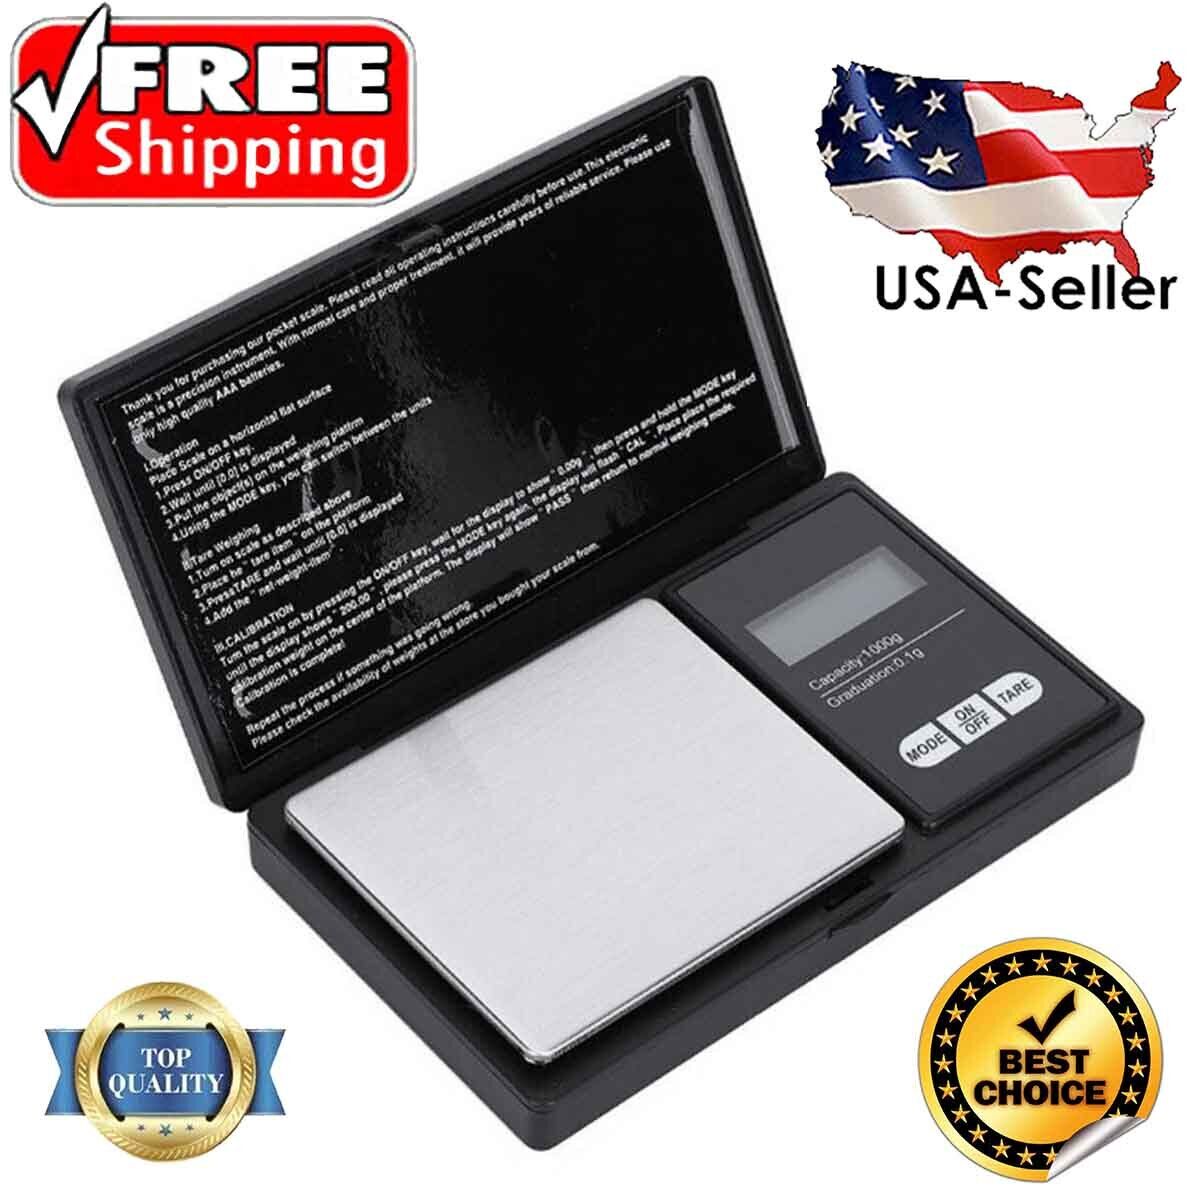 Digital Pocket Scale 1000g x 0.1g Portable Weight Jewelry Gram Coin Herb Gold